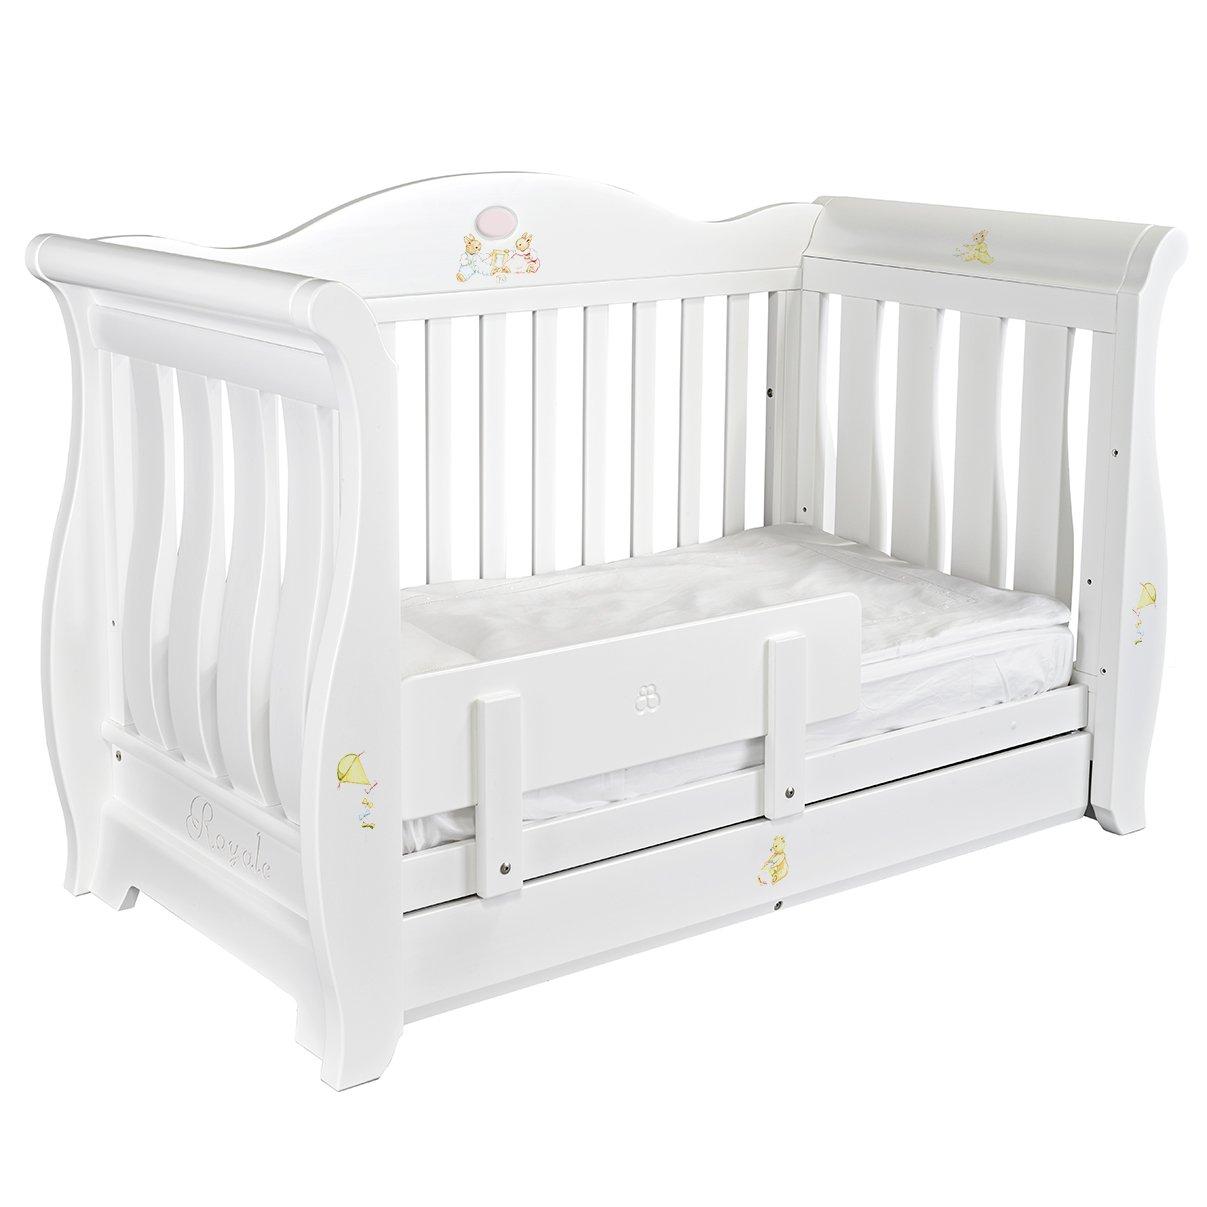 Sleigh Cot Bed